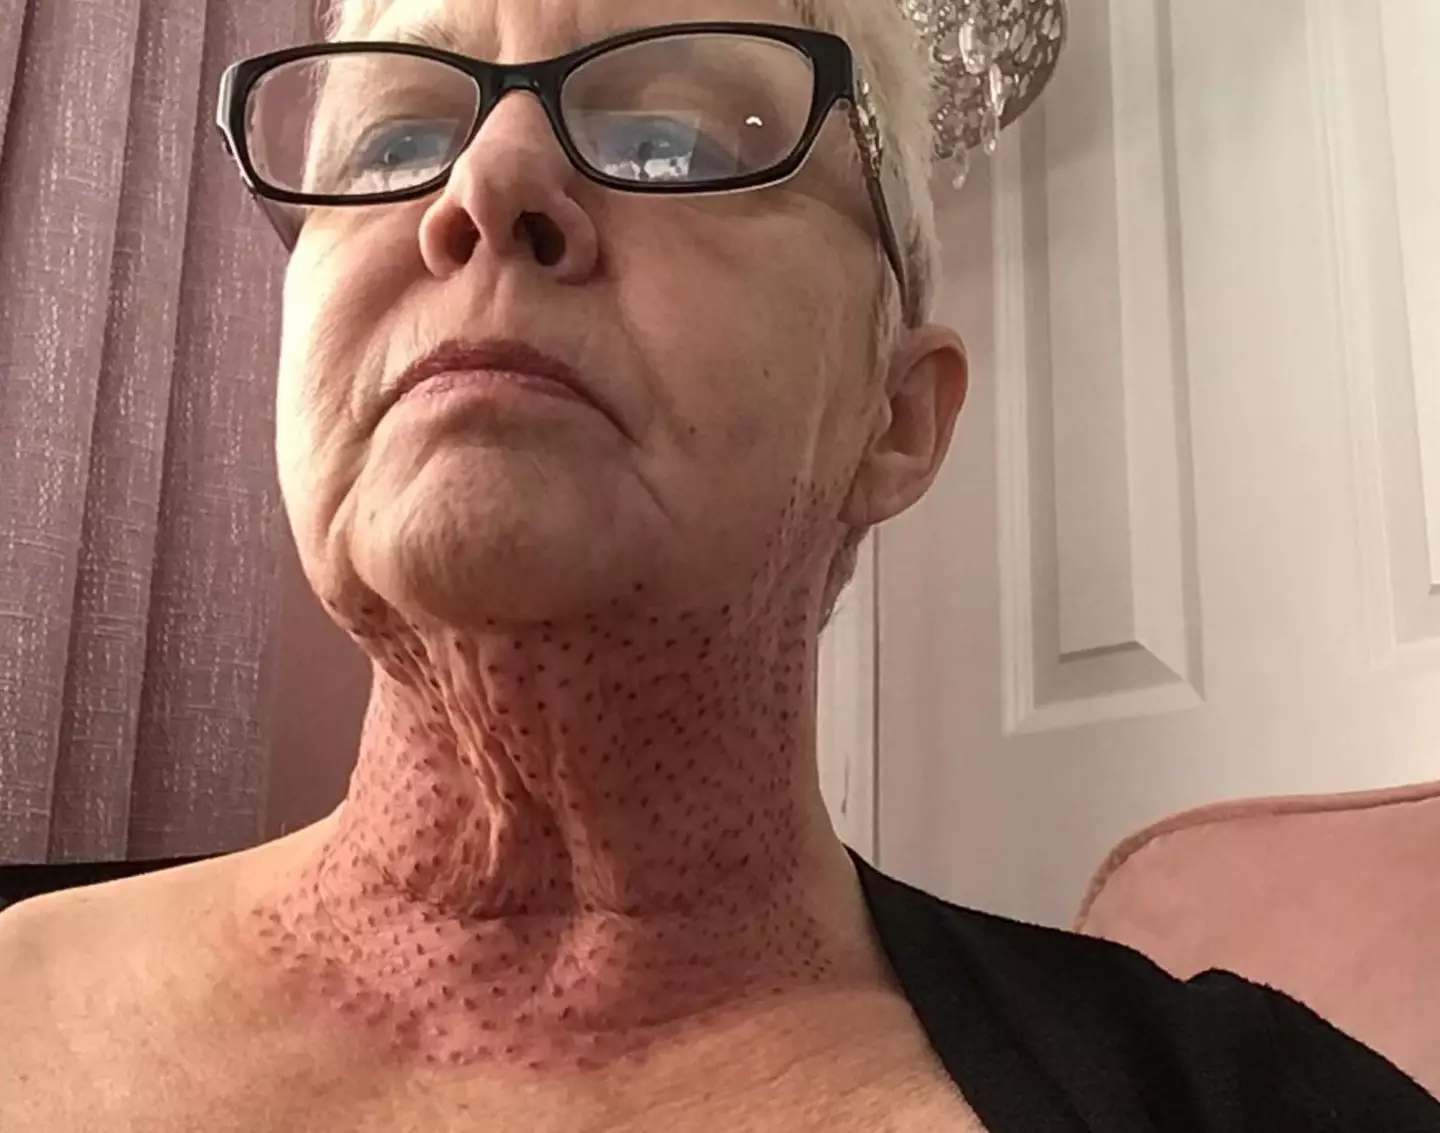 Hampshire-based Jayne Bowman, 59, paid £500 to have a fibroblast therapy treatment but was left with red blotches.